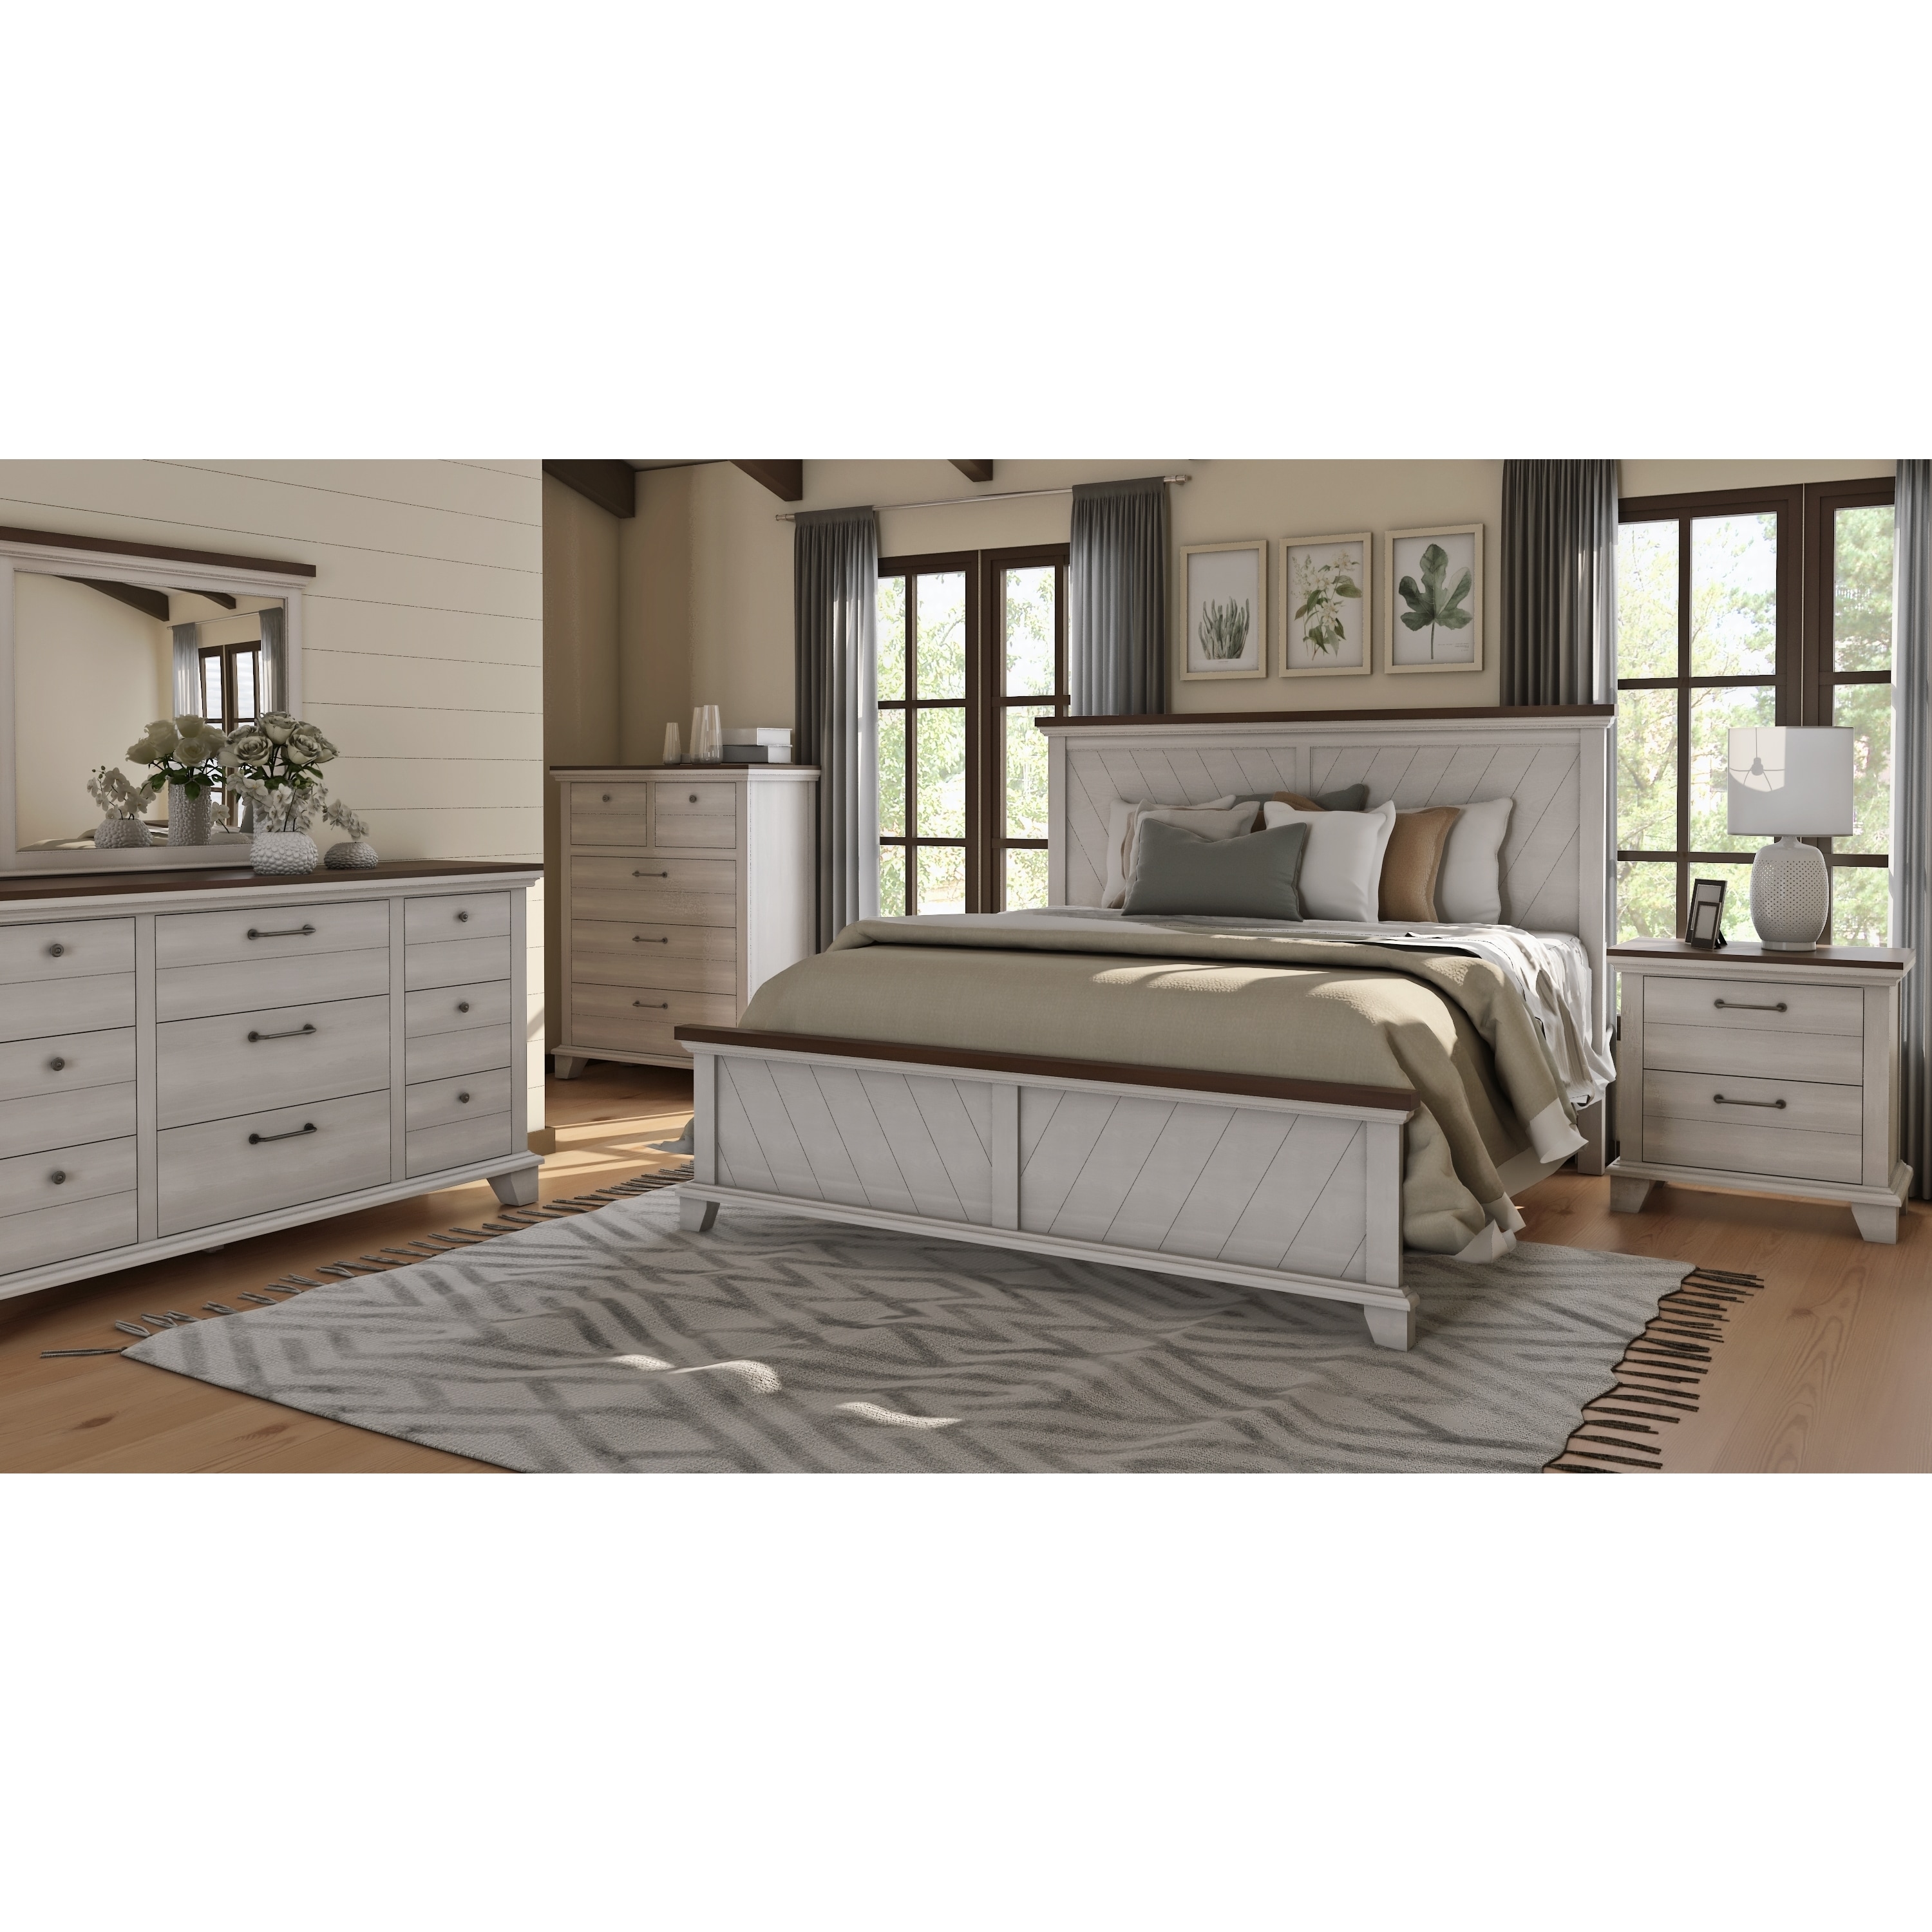 The Gray Barn Overlook Two Tone Dresser And Mirror